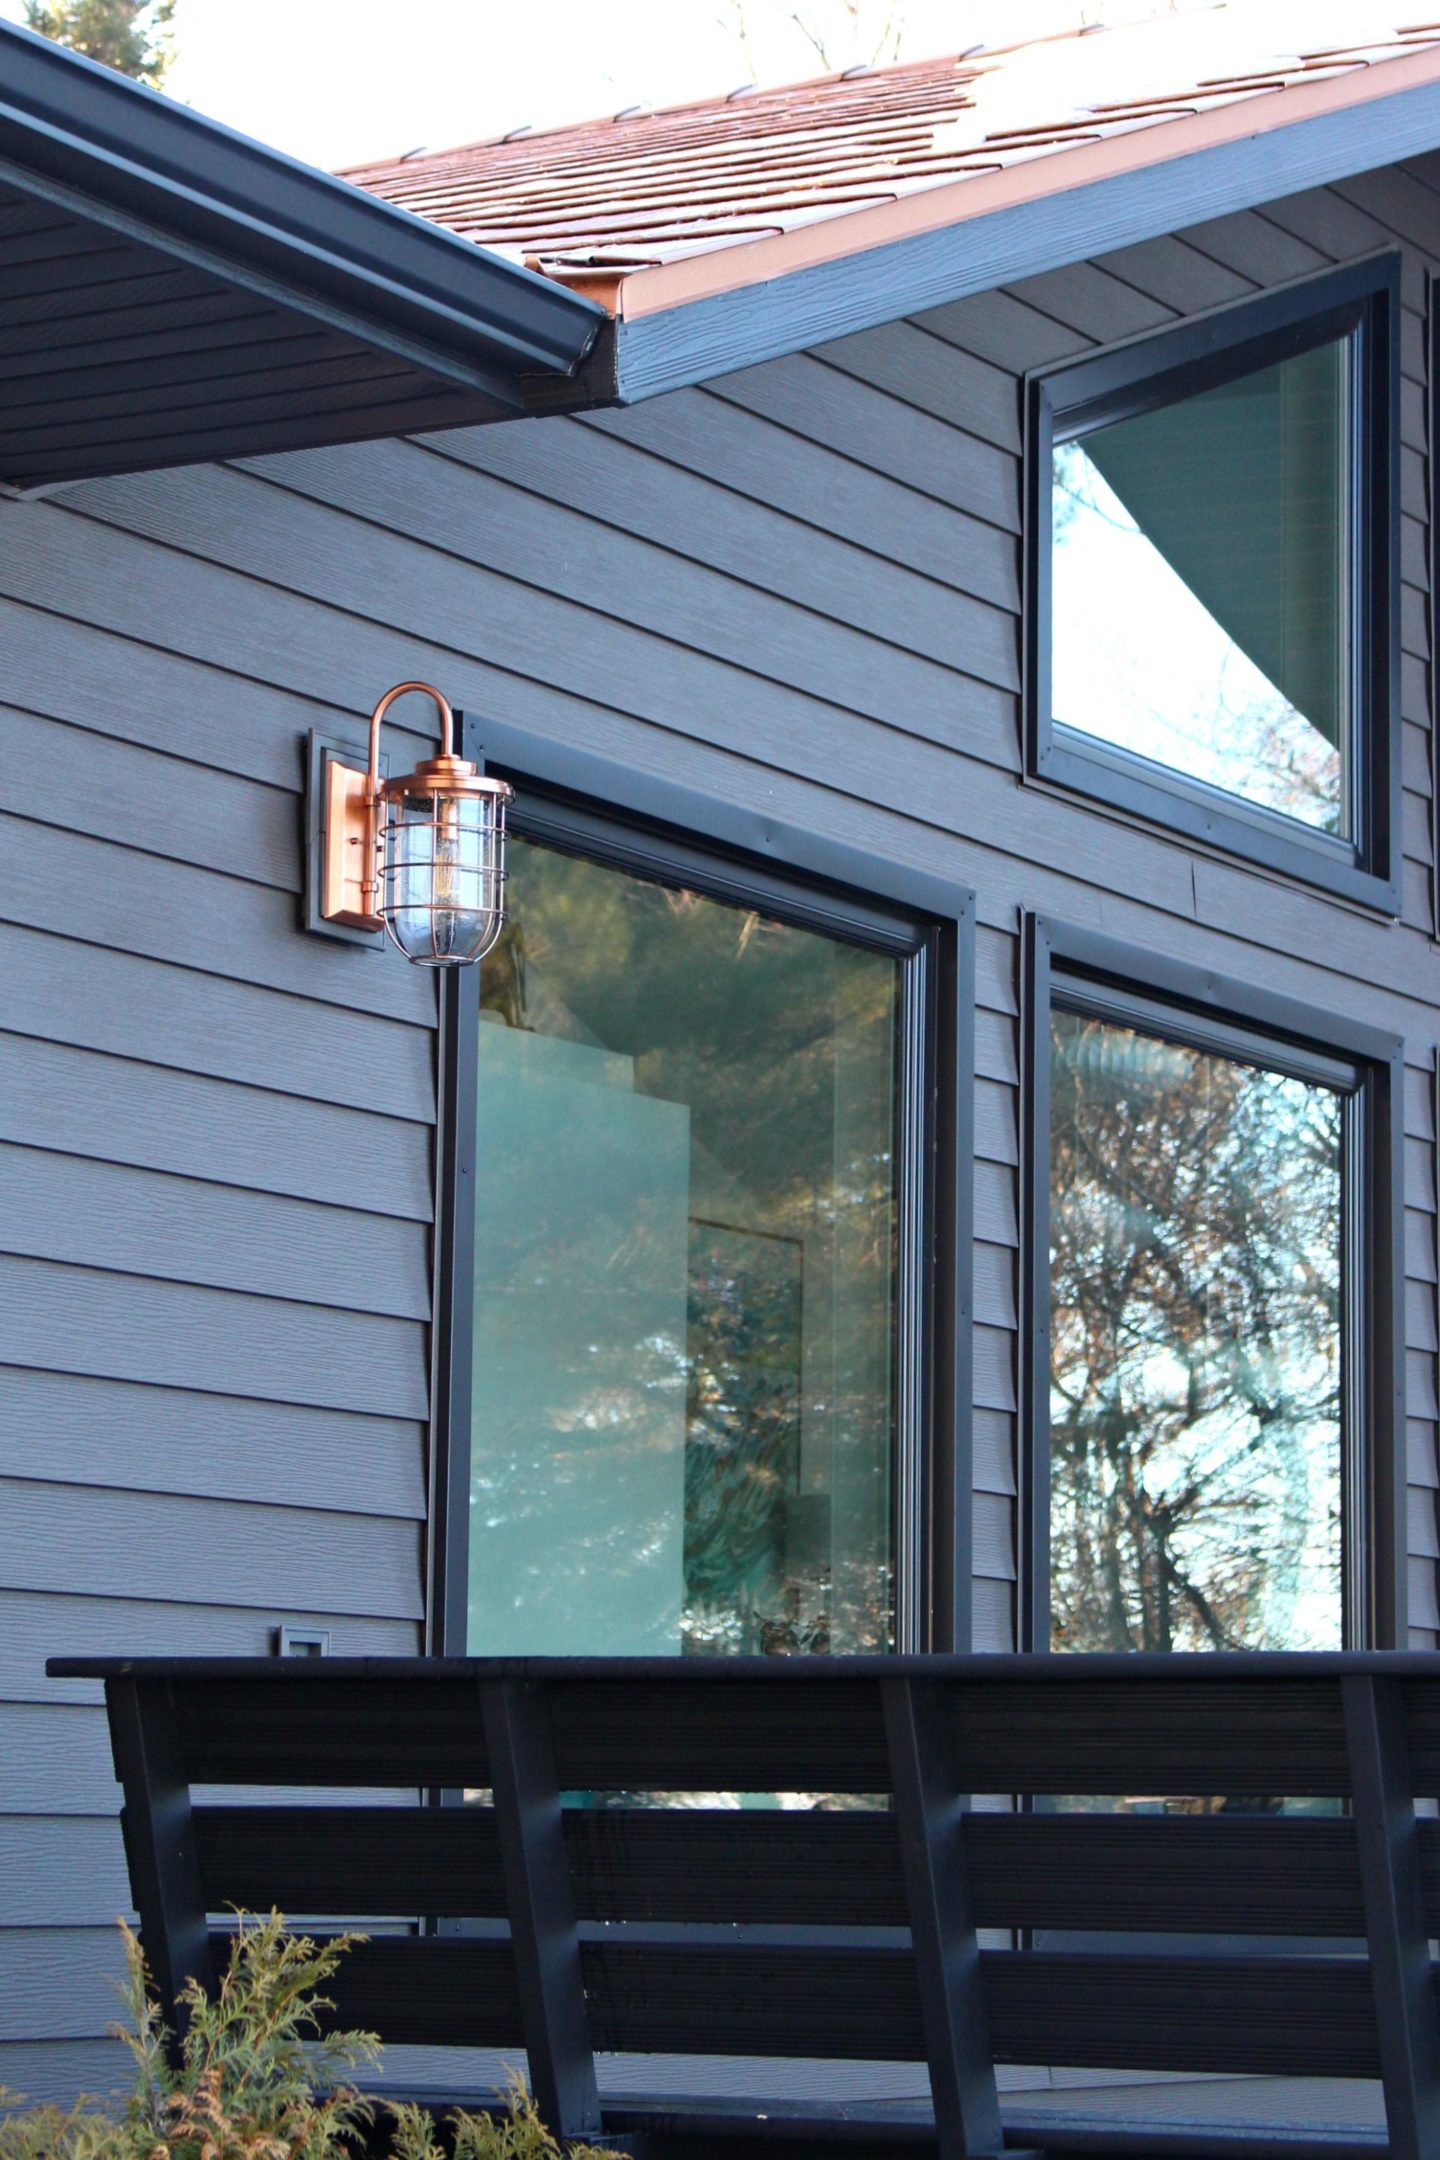 Copper Ferry Lights on Dark Grey Metal Siding with Copper Roof | Siding That Sparkles! 